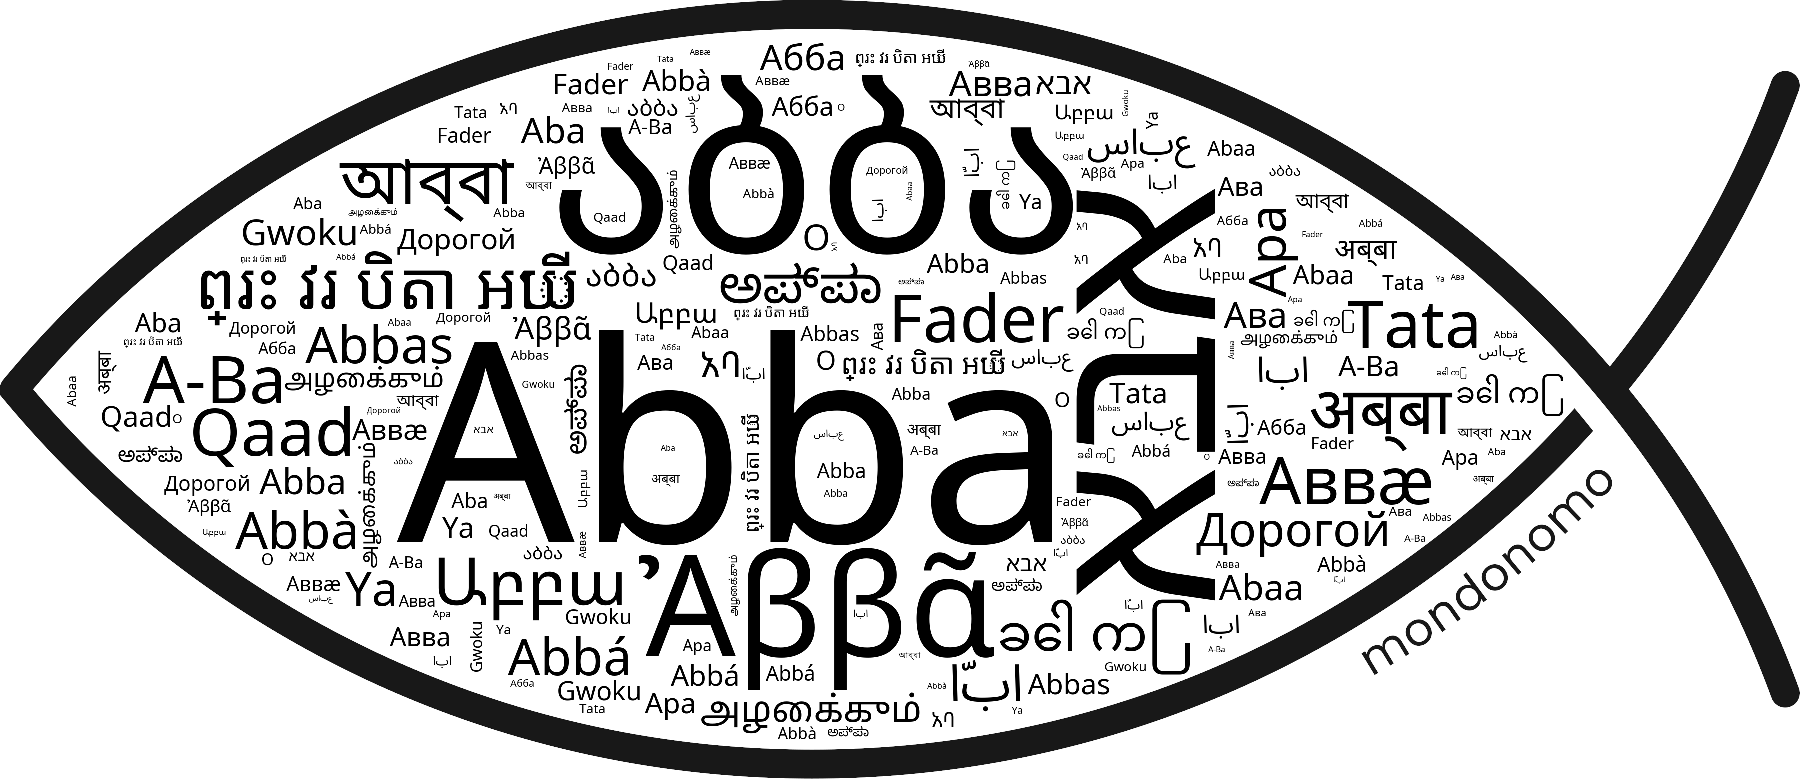 Name Abba in the world's Bibles